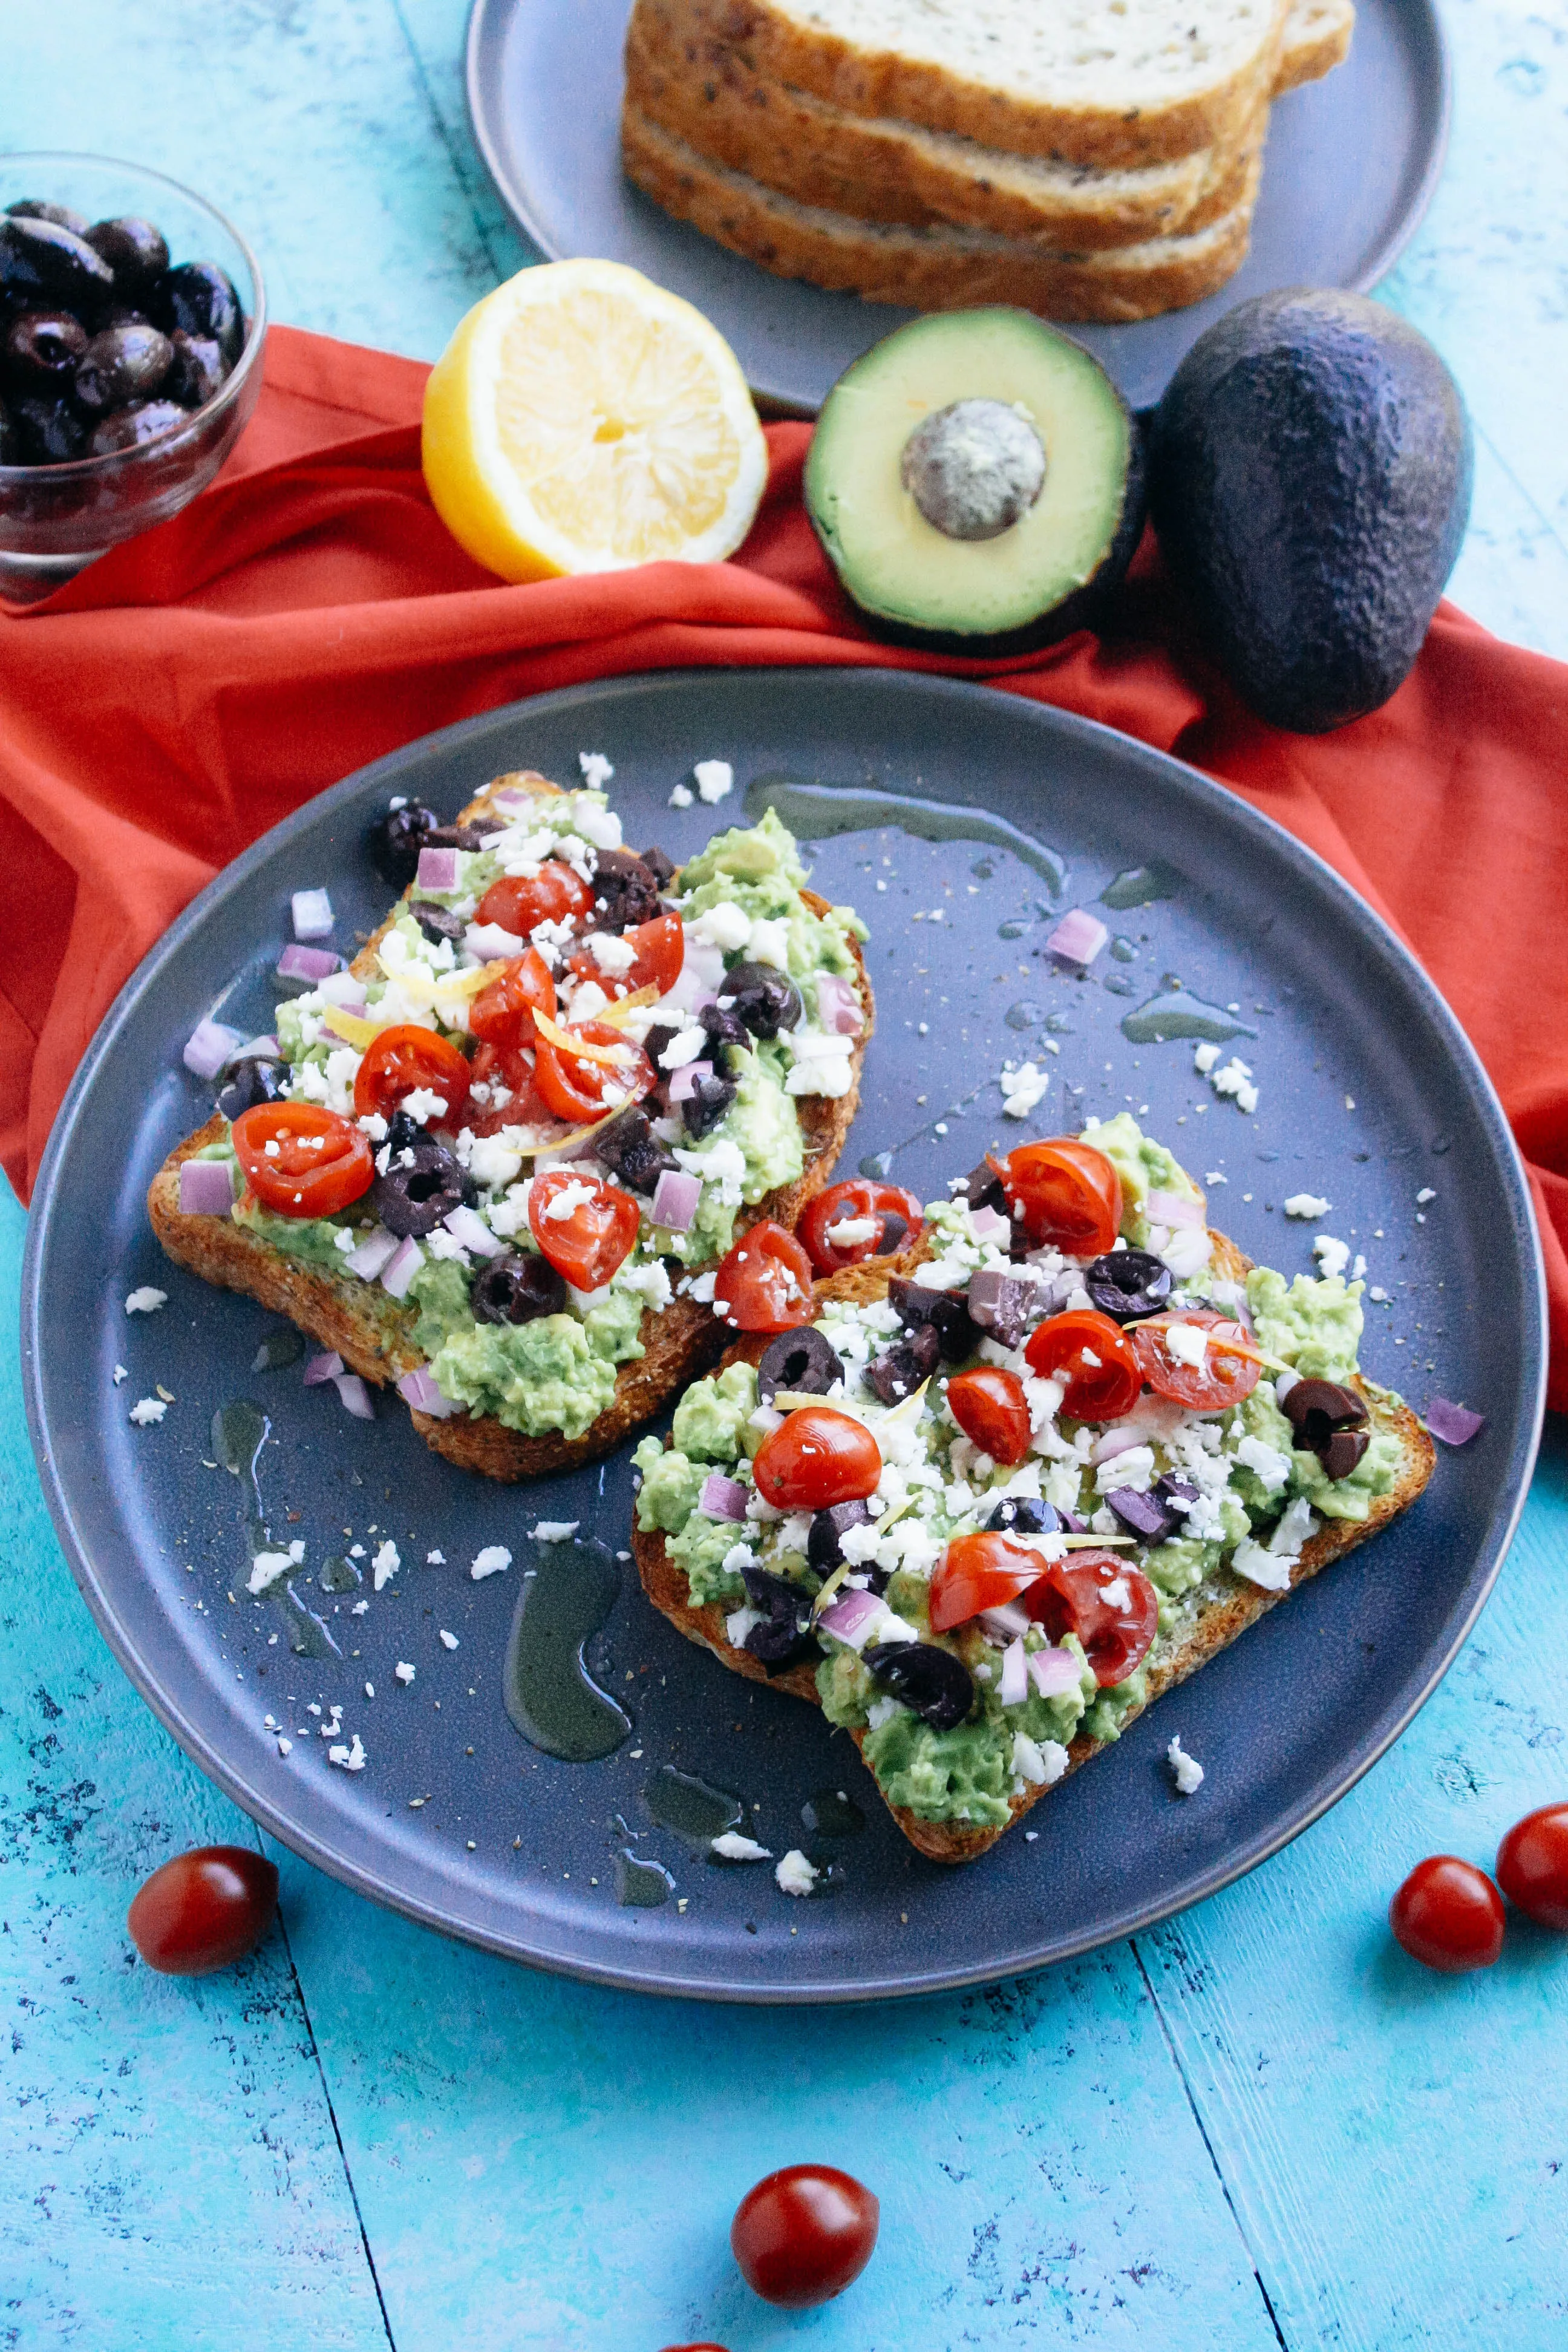 Greek-Style Avocado Toast is a delightful, simple meal. You'll love how easy it is to make this Greek-Style Avocado Toast.